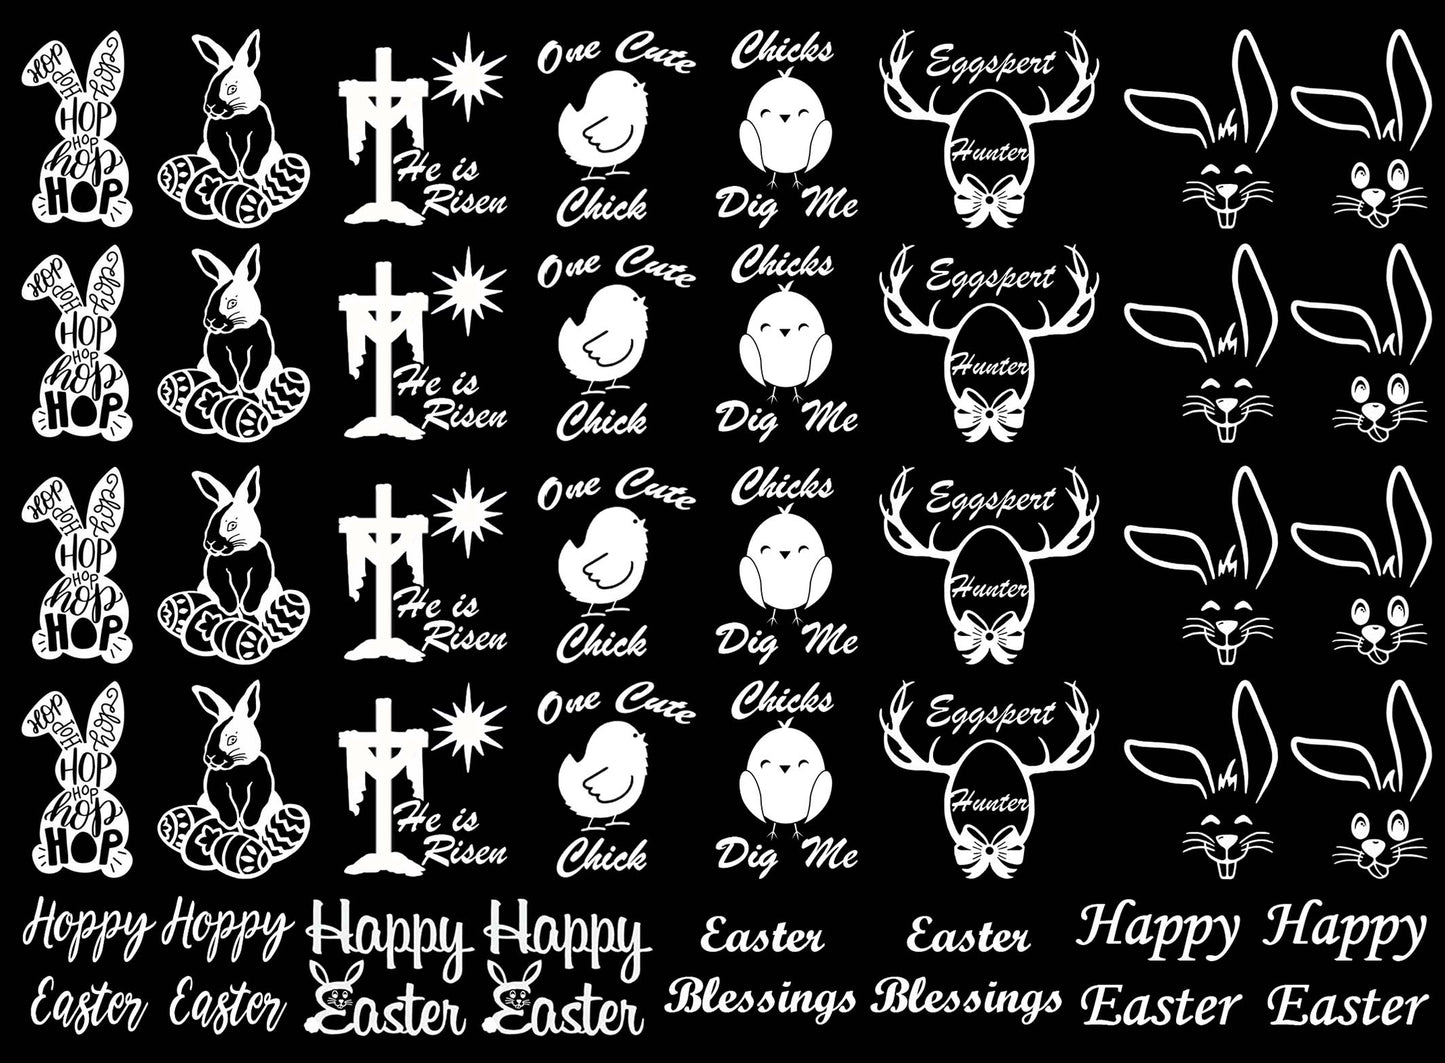 Easter Sketch 40 pcs 1" White Fused Glass Decals